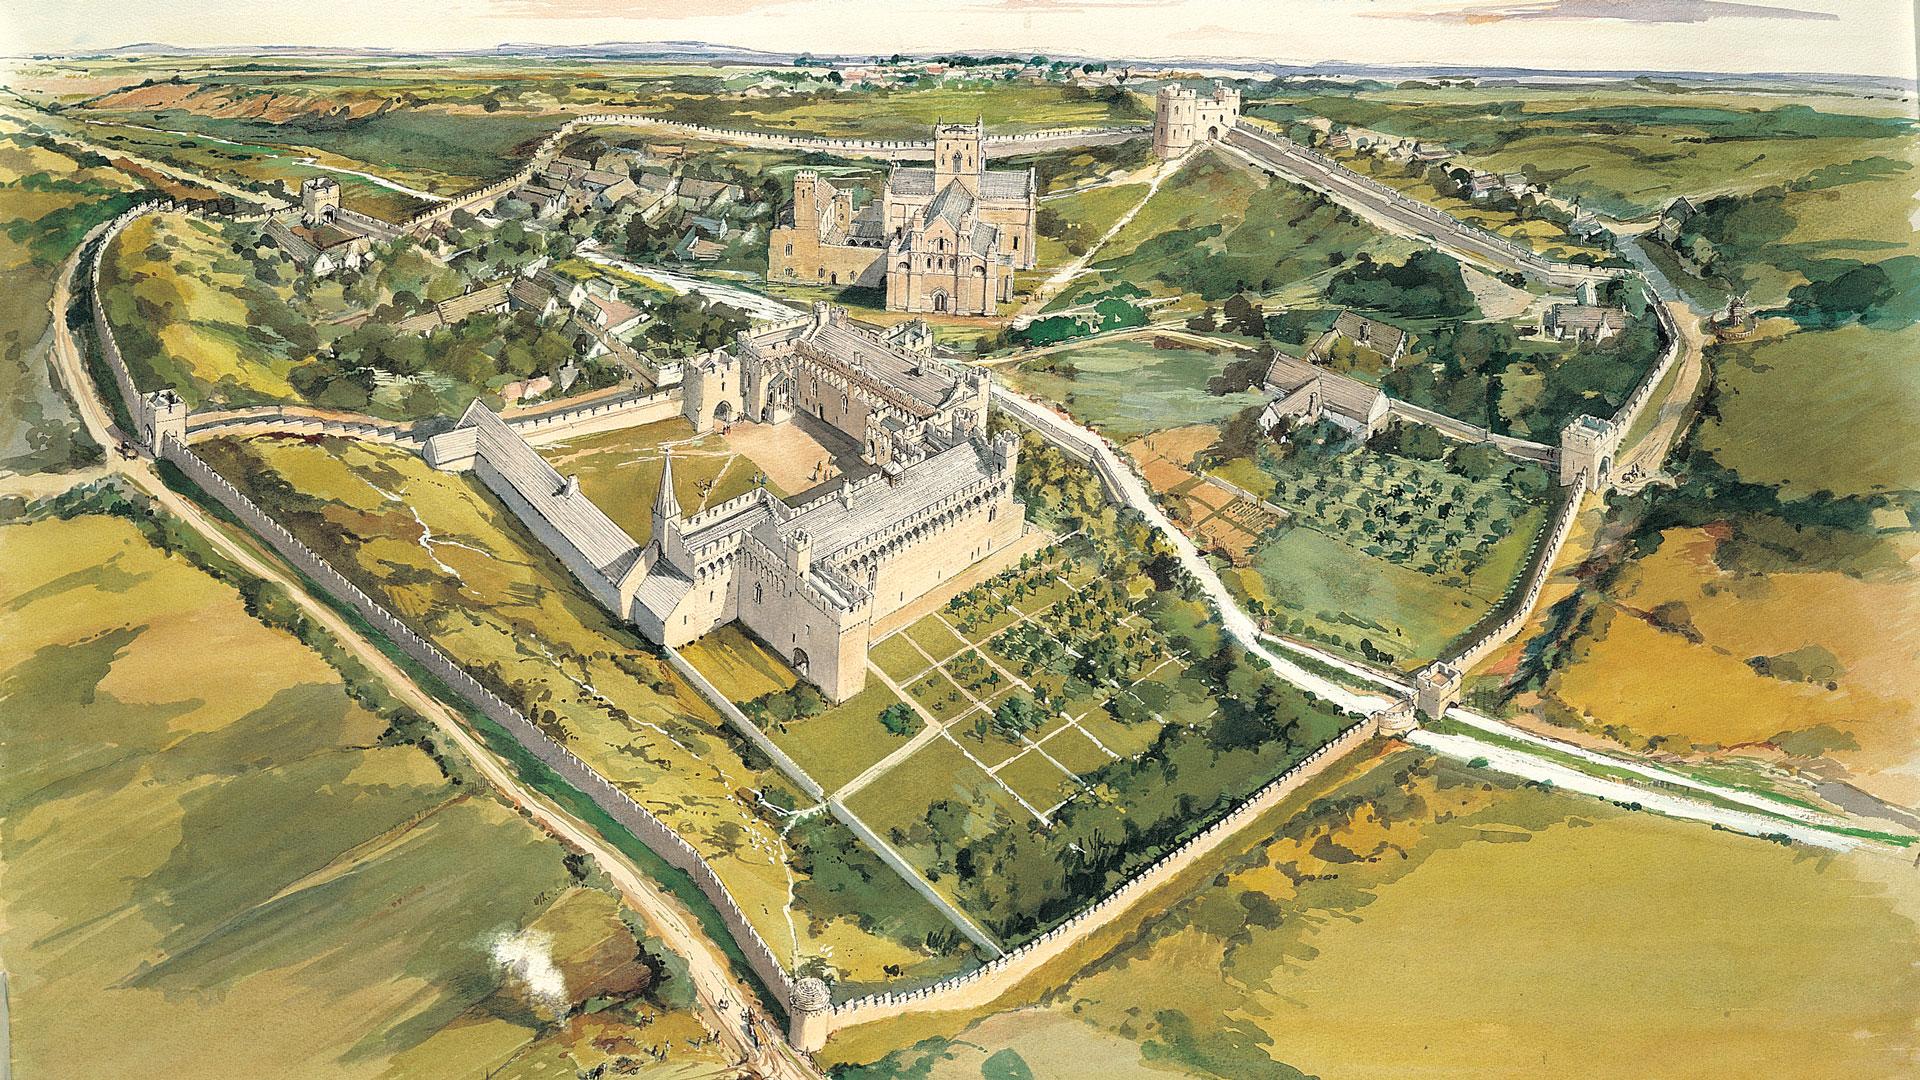 Artist impression of St Davids Bishop's Palace and cathedral